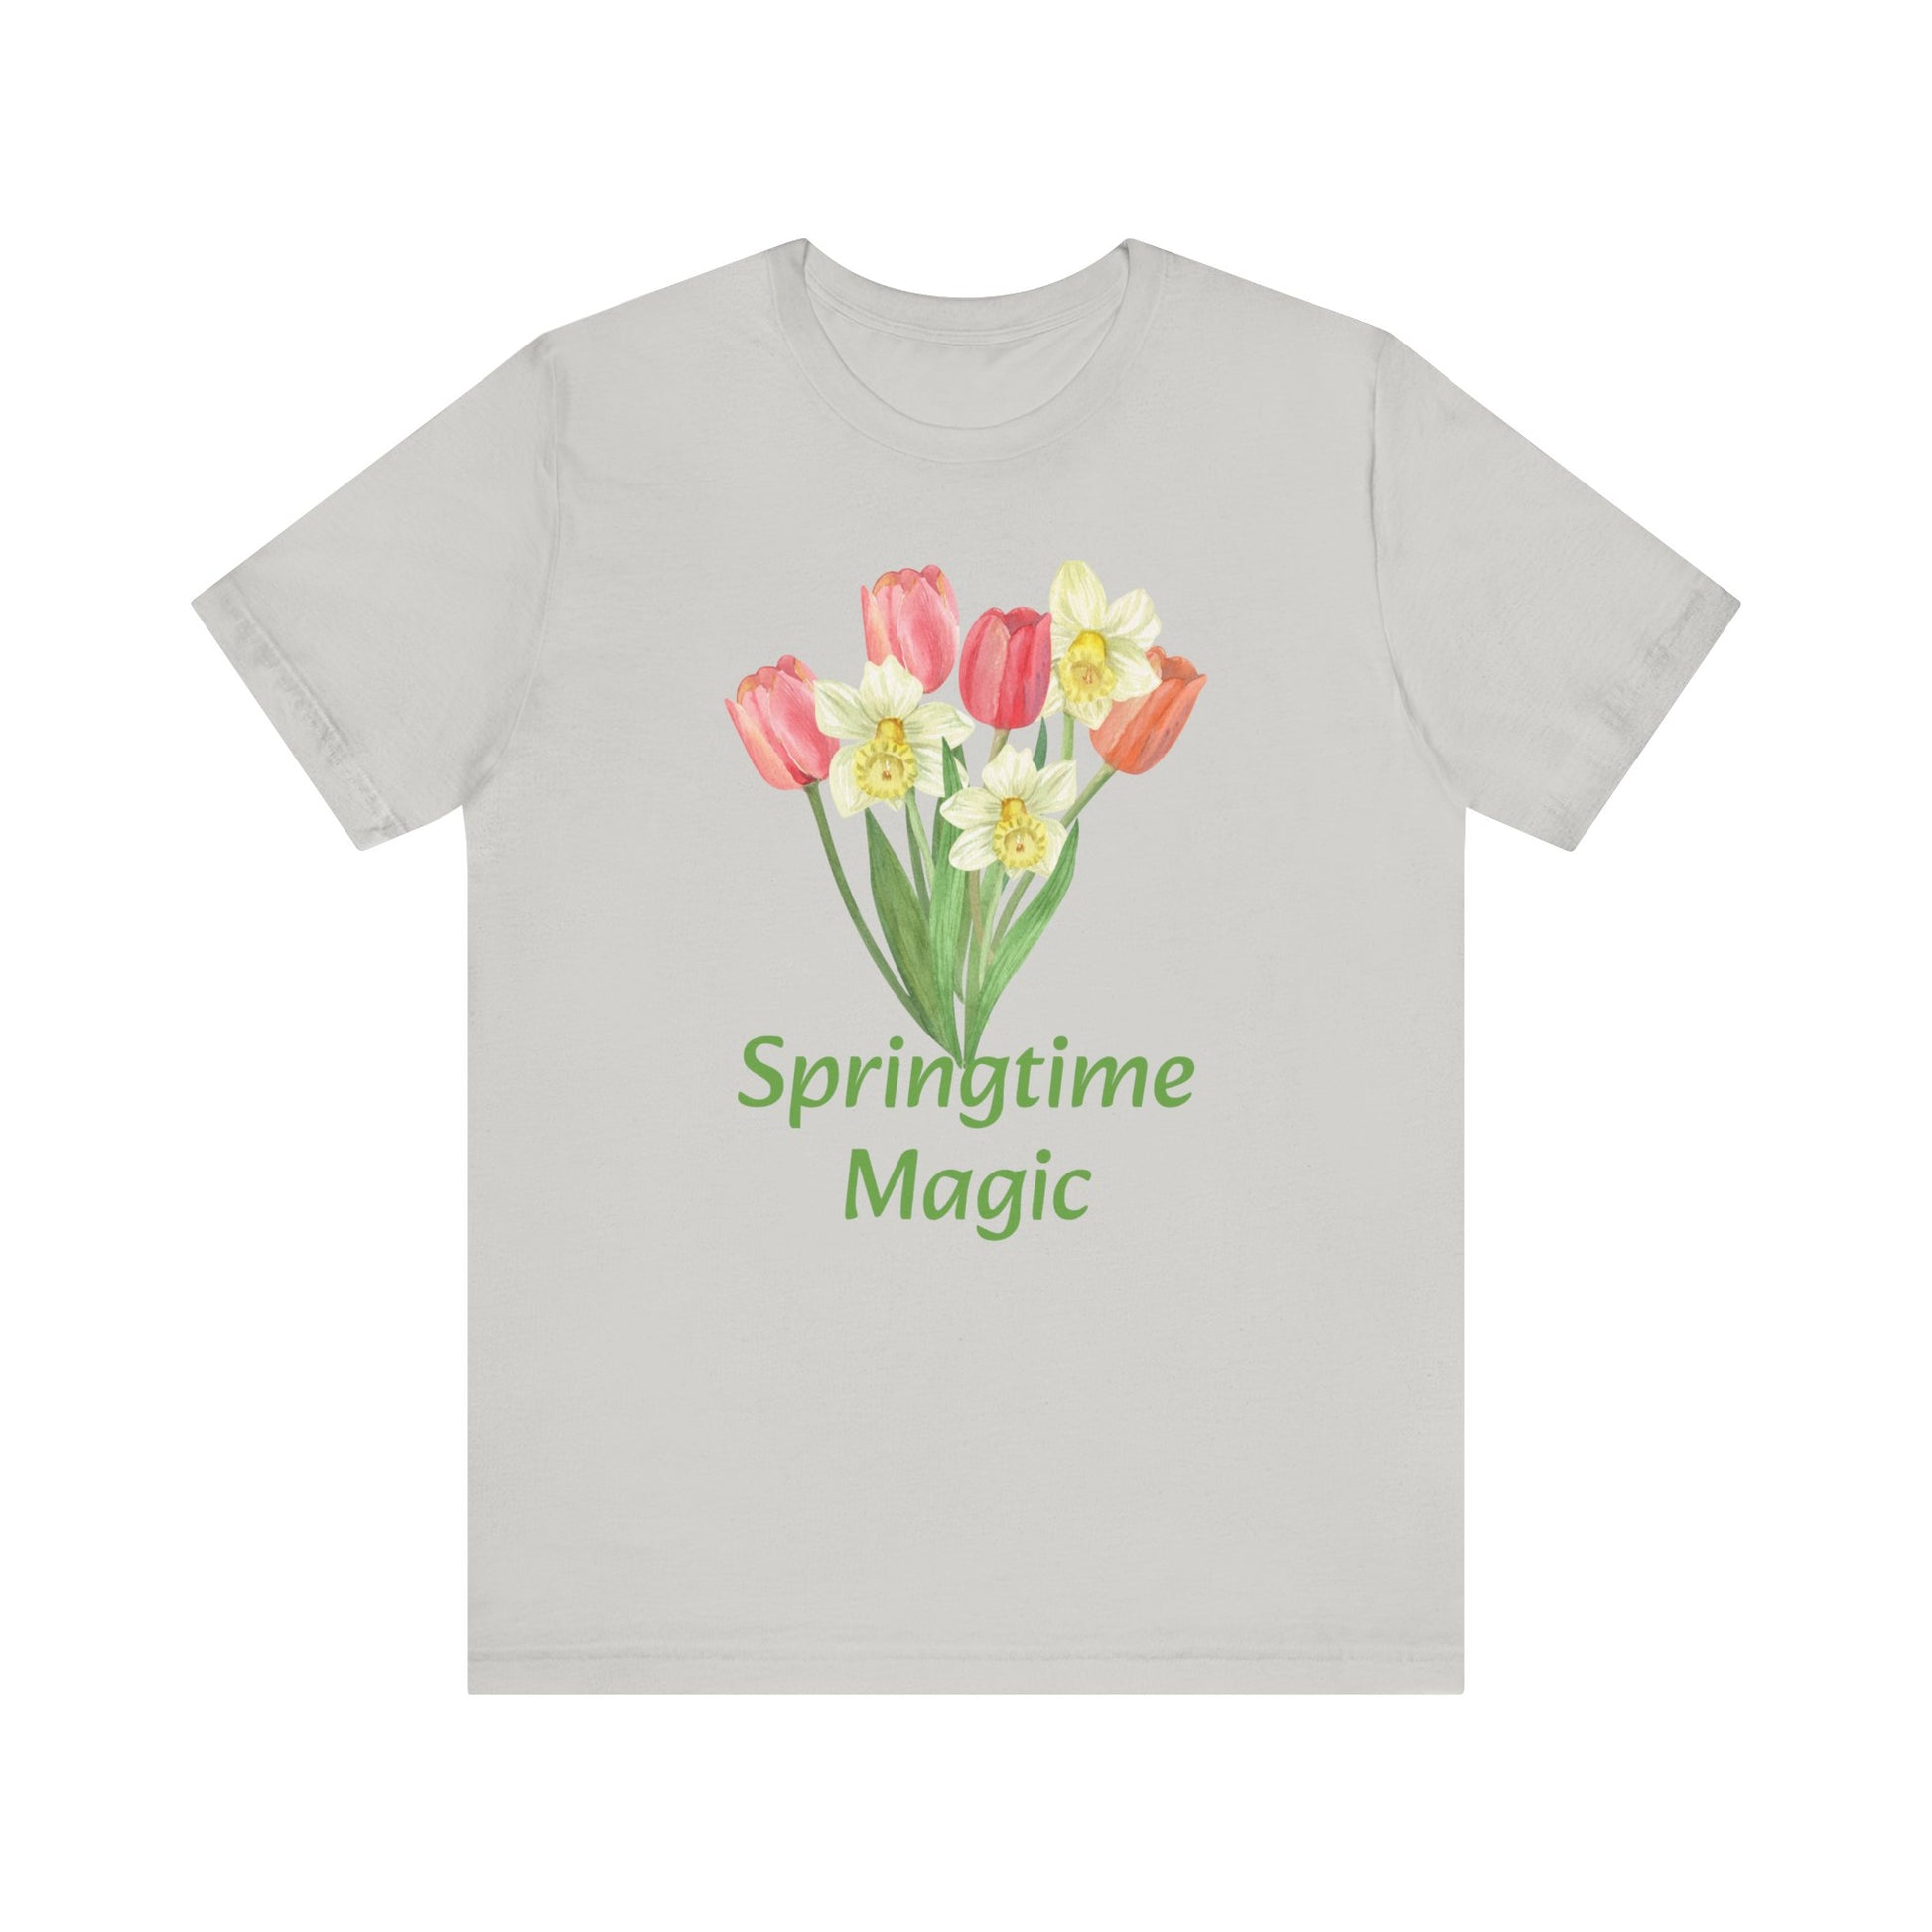 A Unisex Springtime-Magic T-shirt with floral graphic artistry and the phrase "springtime magic" written below made of cotton from Bella + Canvas, available on Printify.